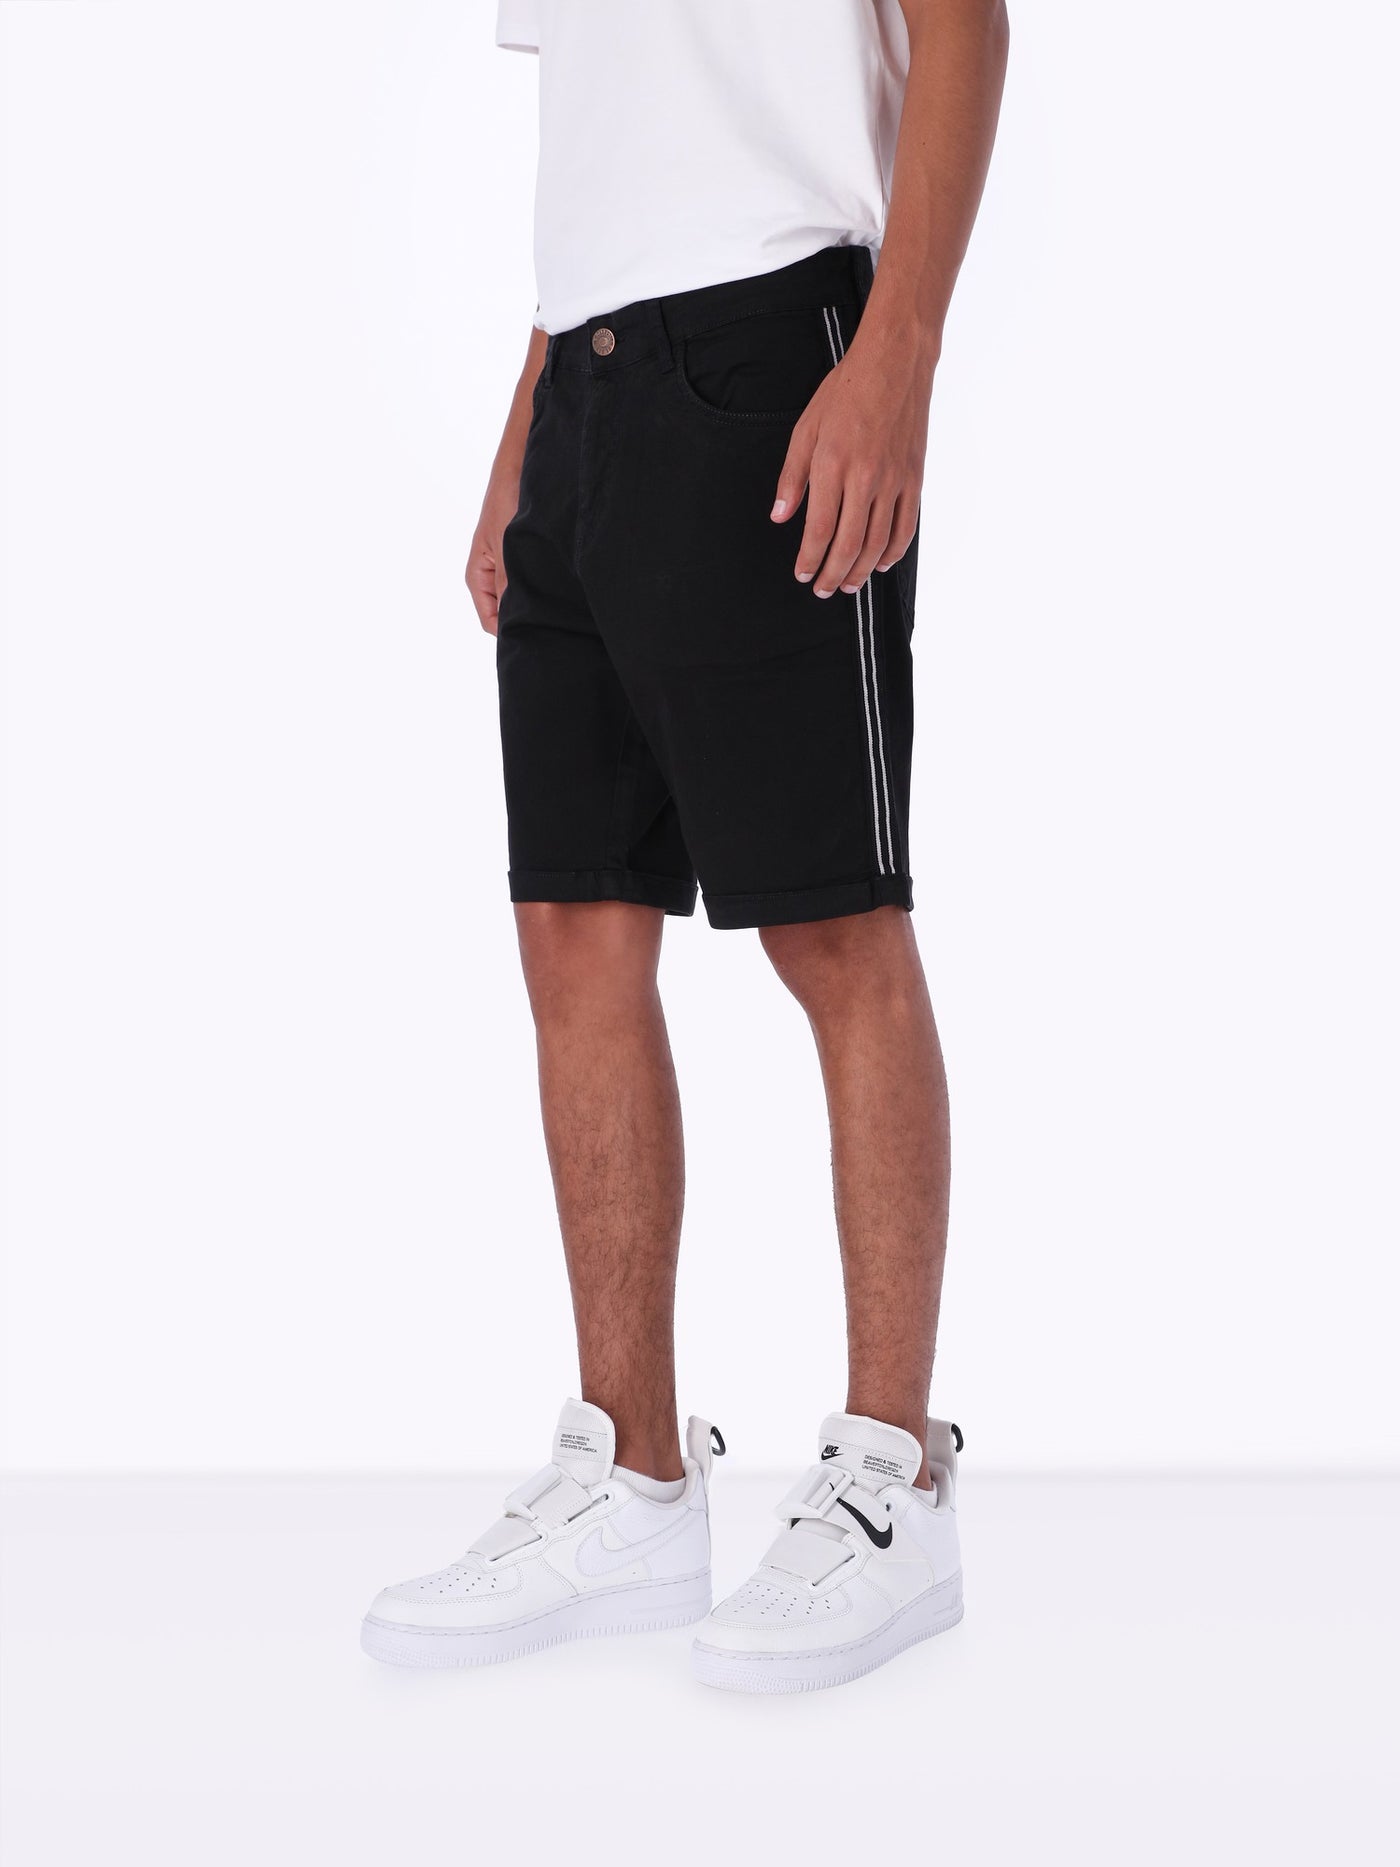 OR Men's Rolled Up Casual Shorts